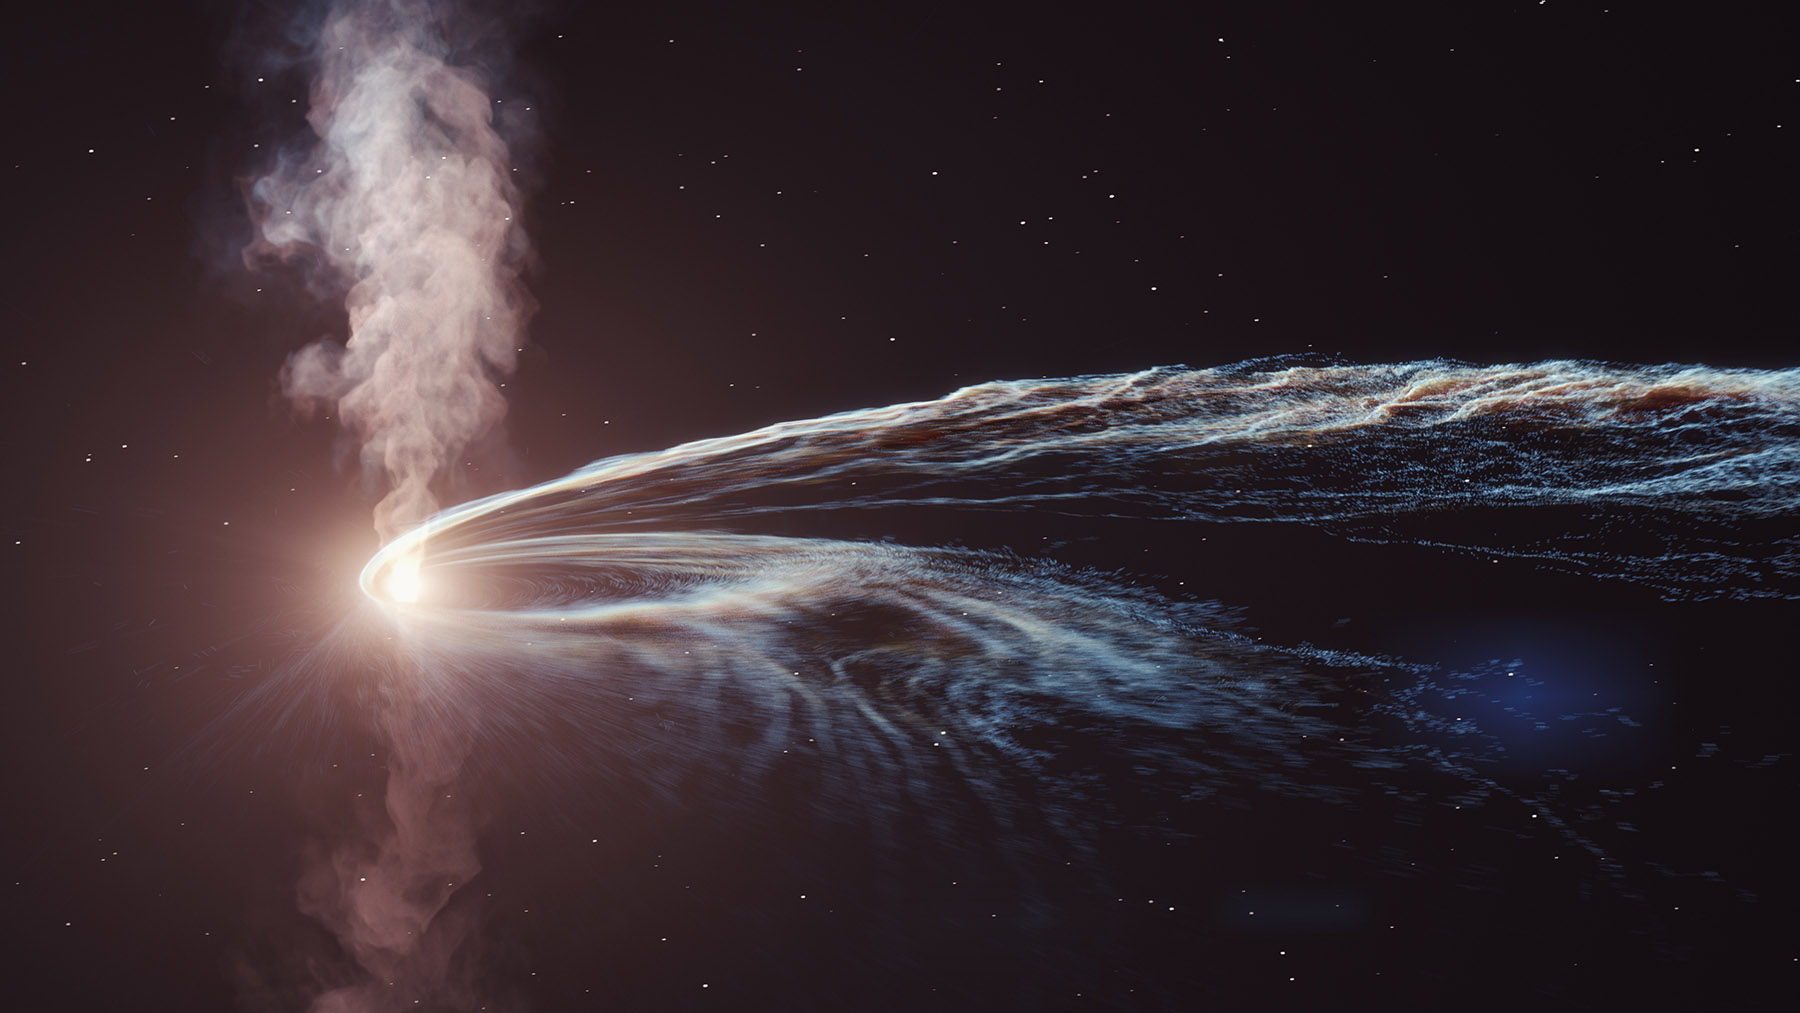 Artist's illustration of tidal disruption event AT2019dsg where a supermassive black hole spaghettifies and gobbles down a star. Some of the material is not consumed by the black hole and is flung back out into space.